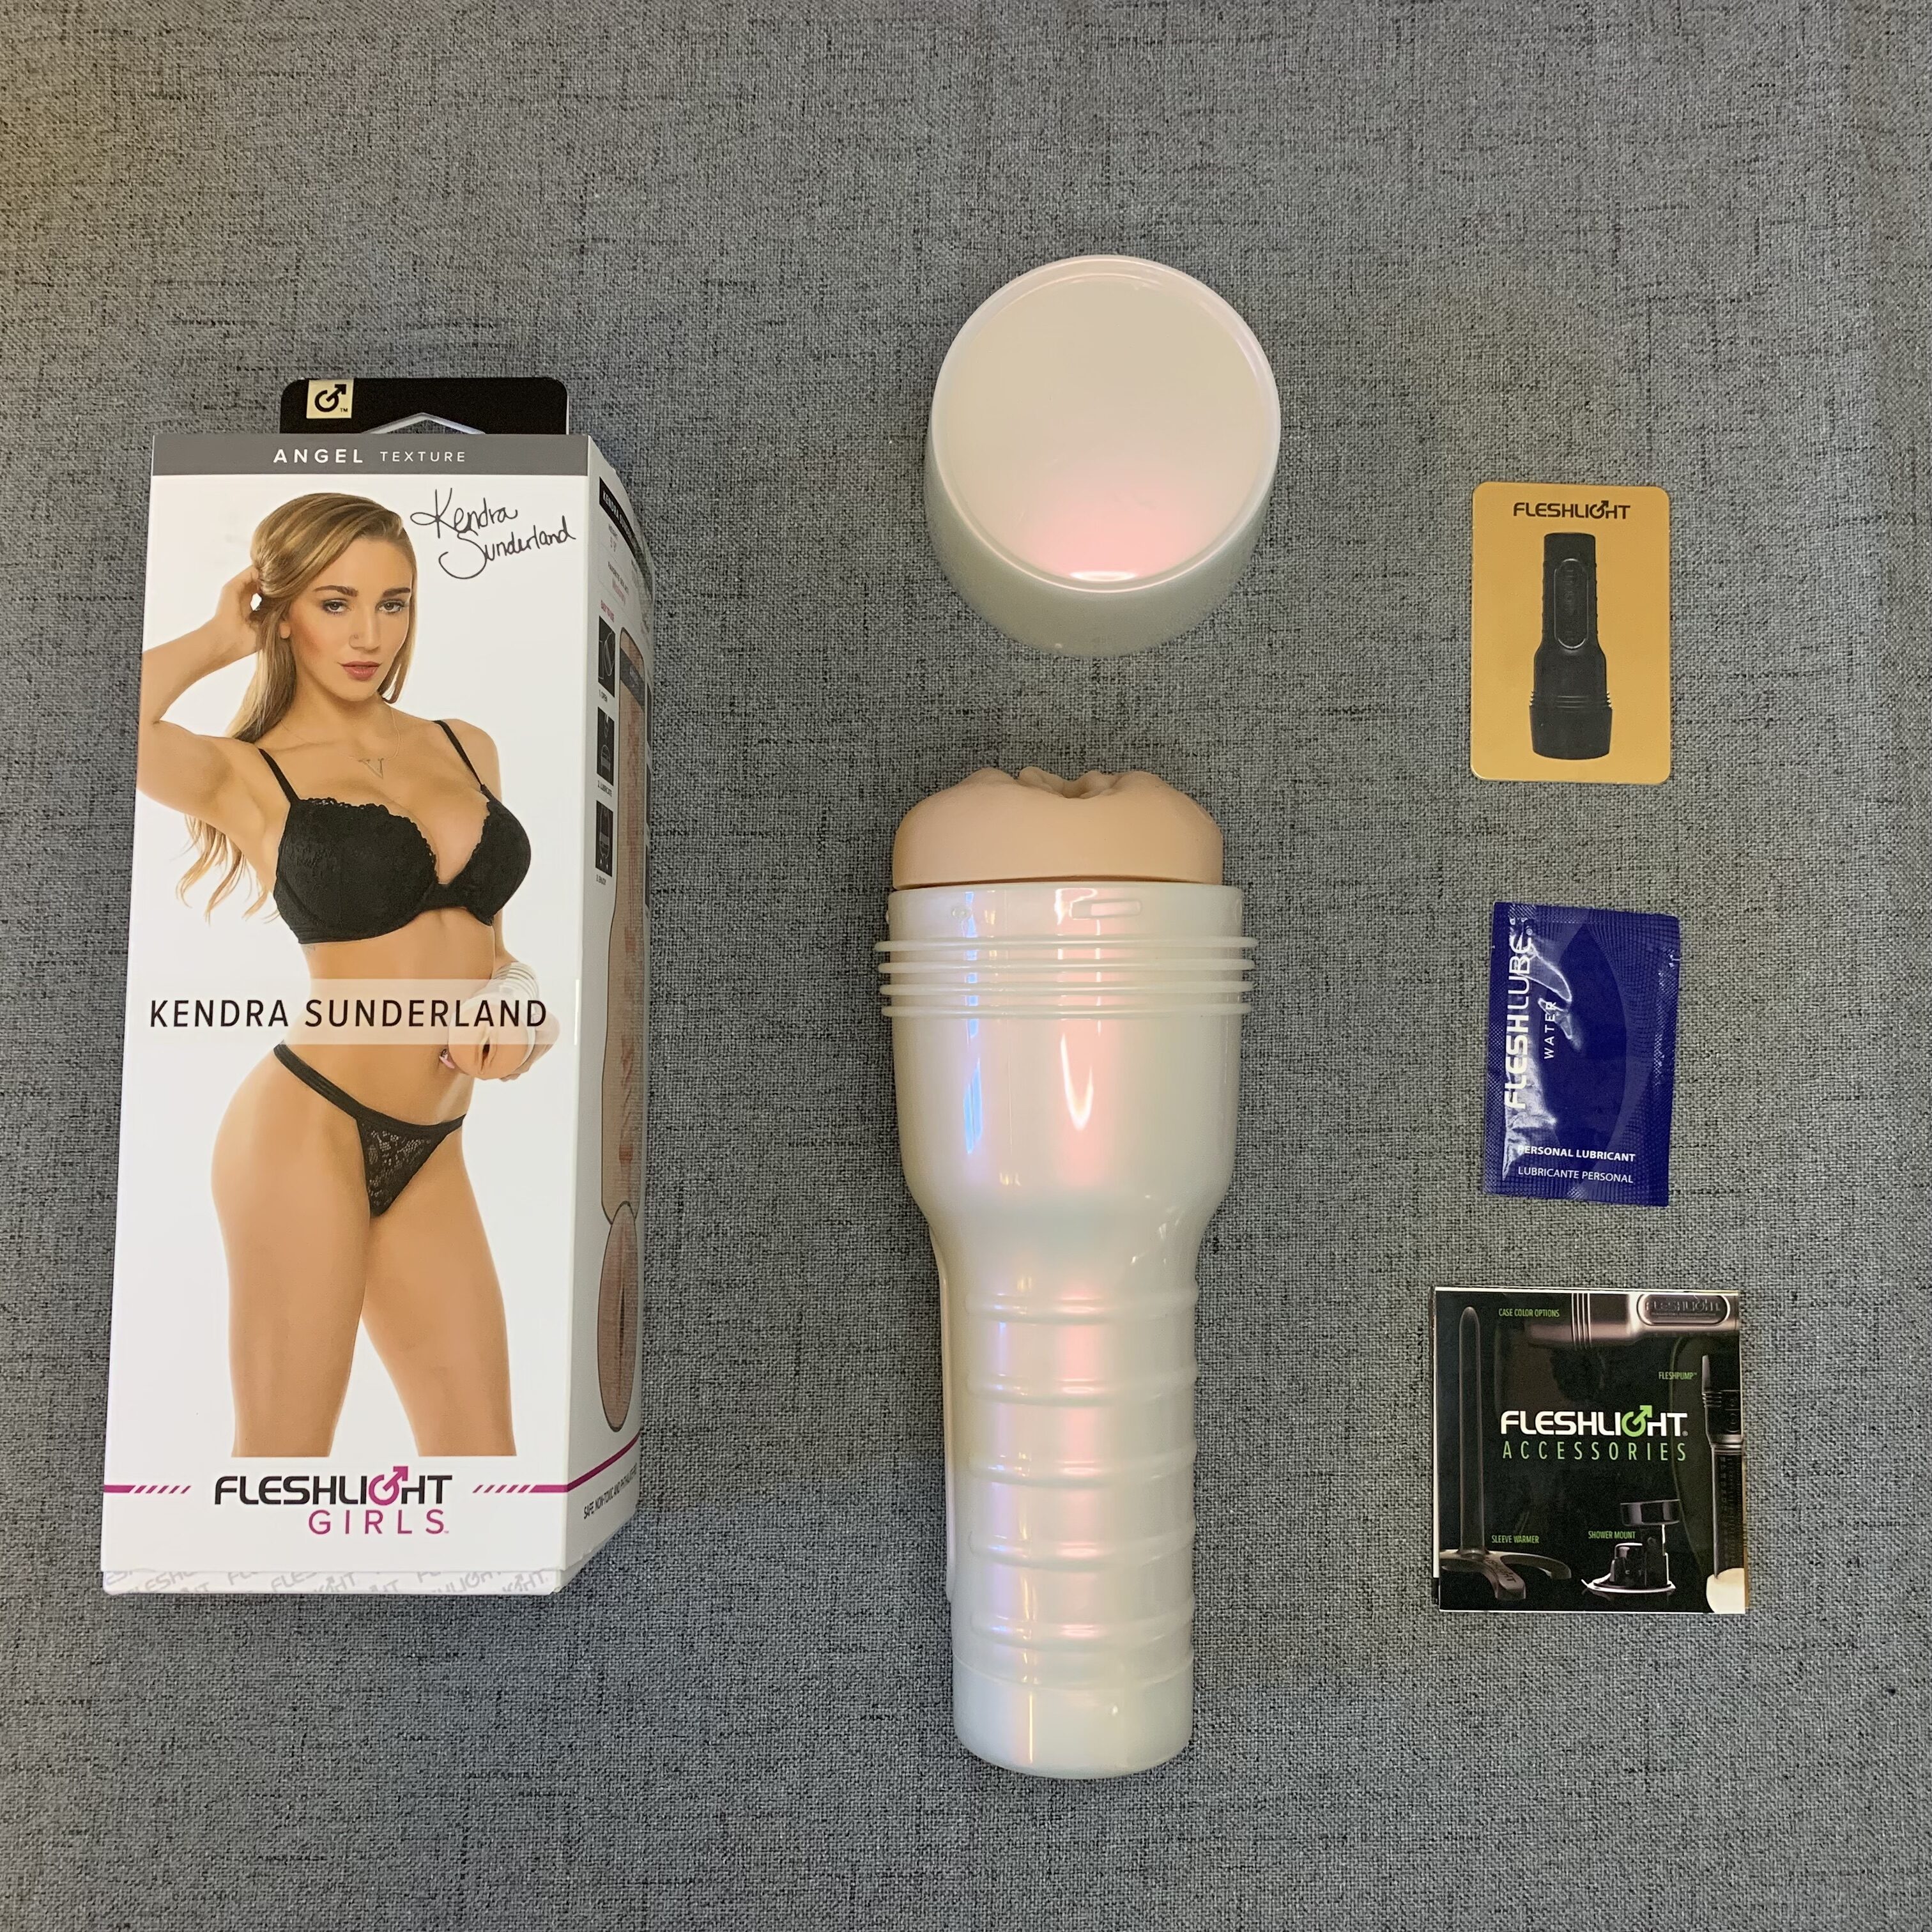 Specifications and features Kendra Sunderland Fleshlight Angel 